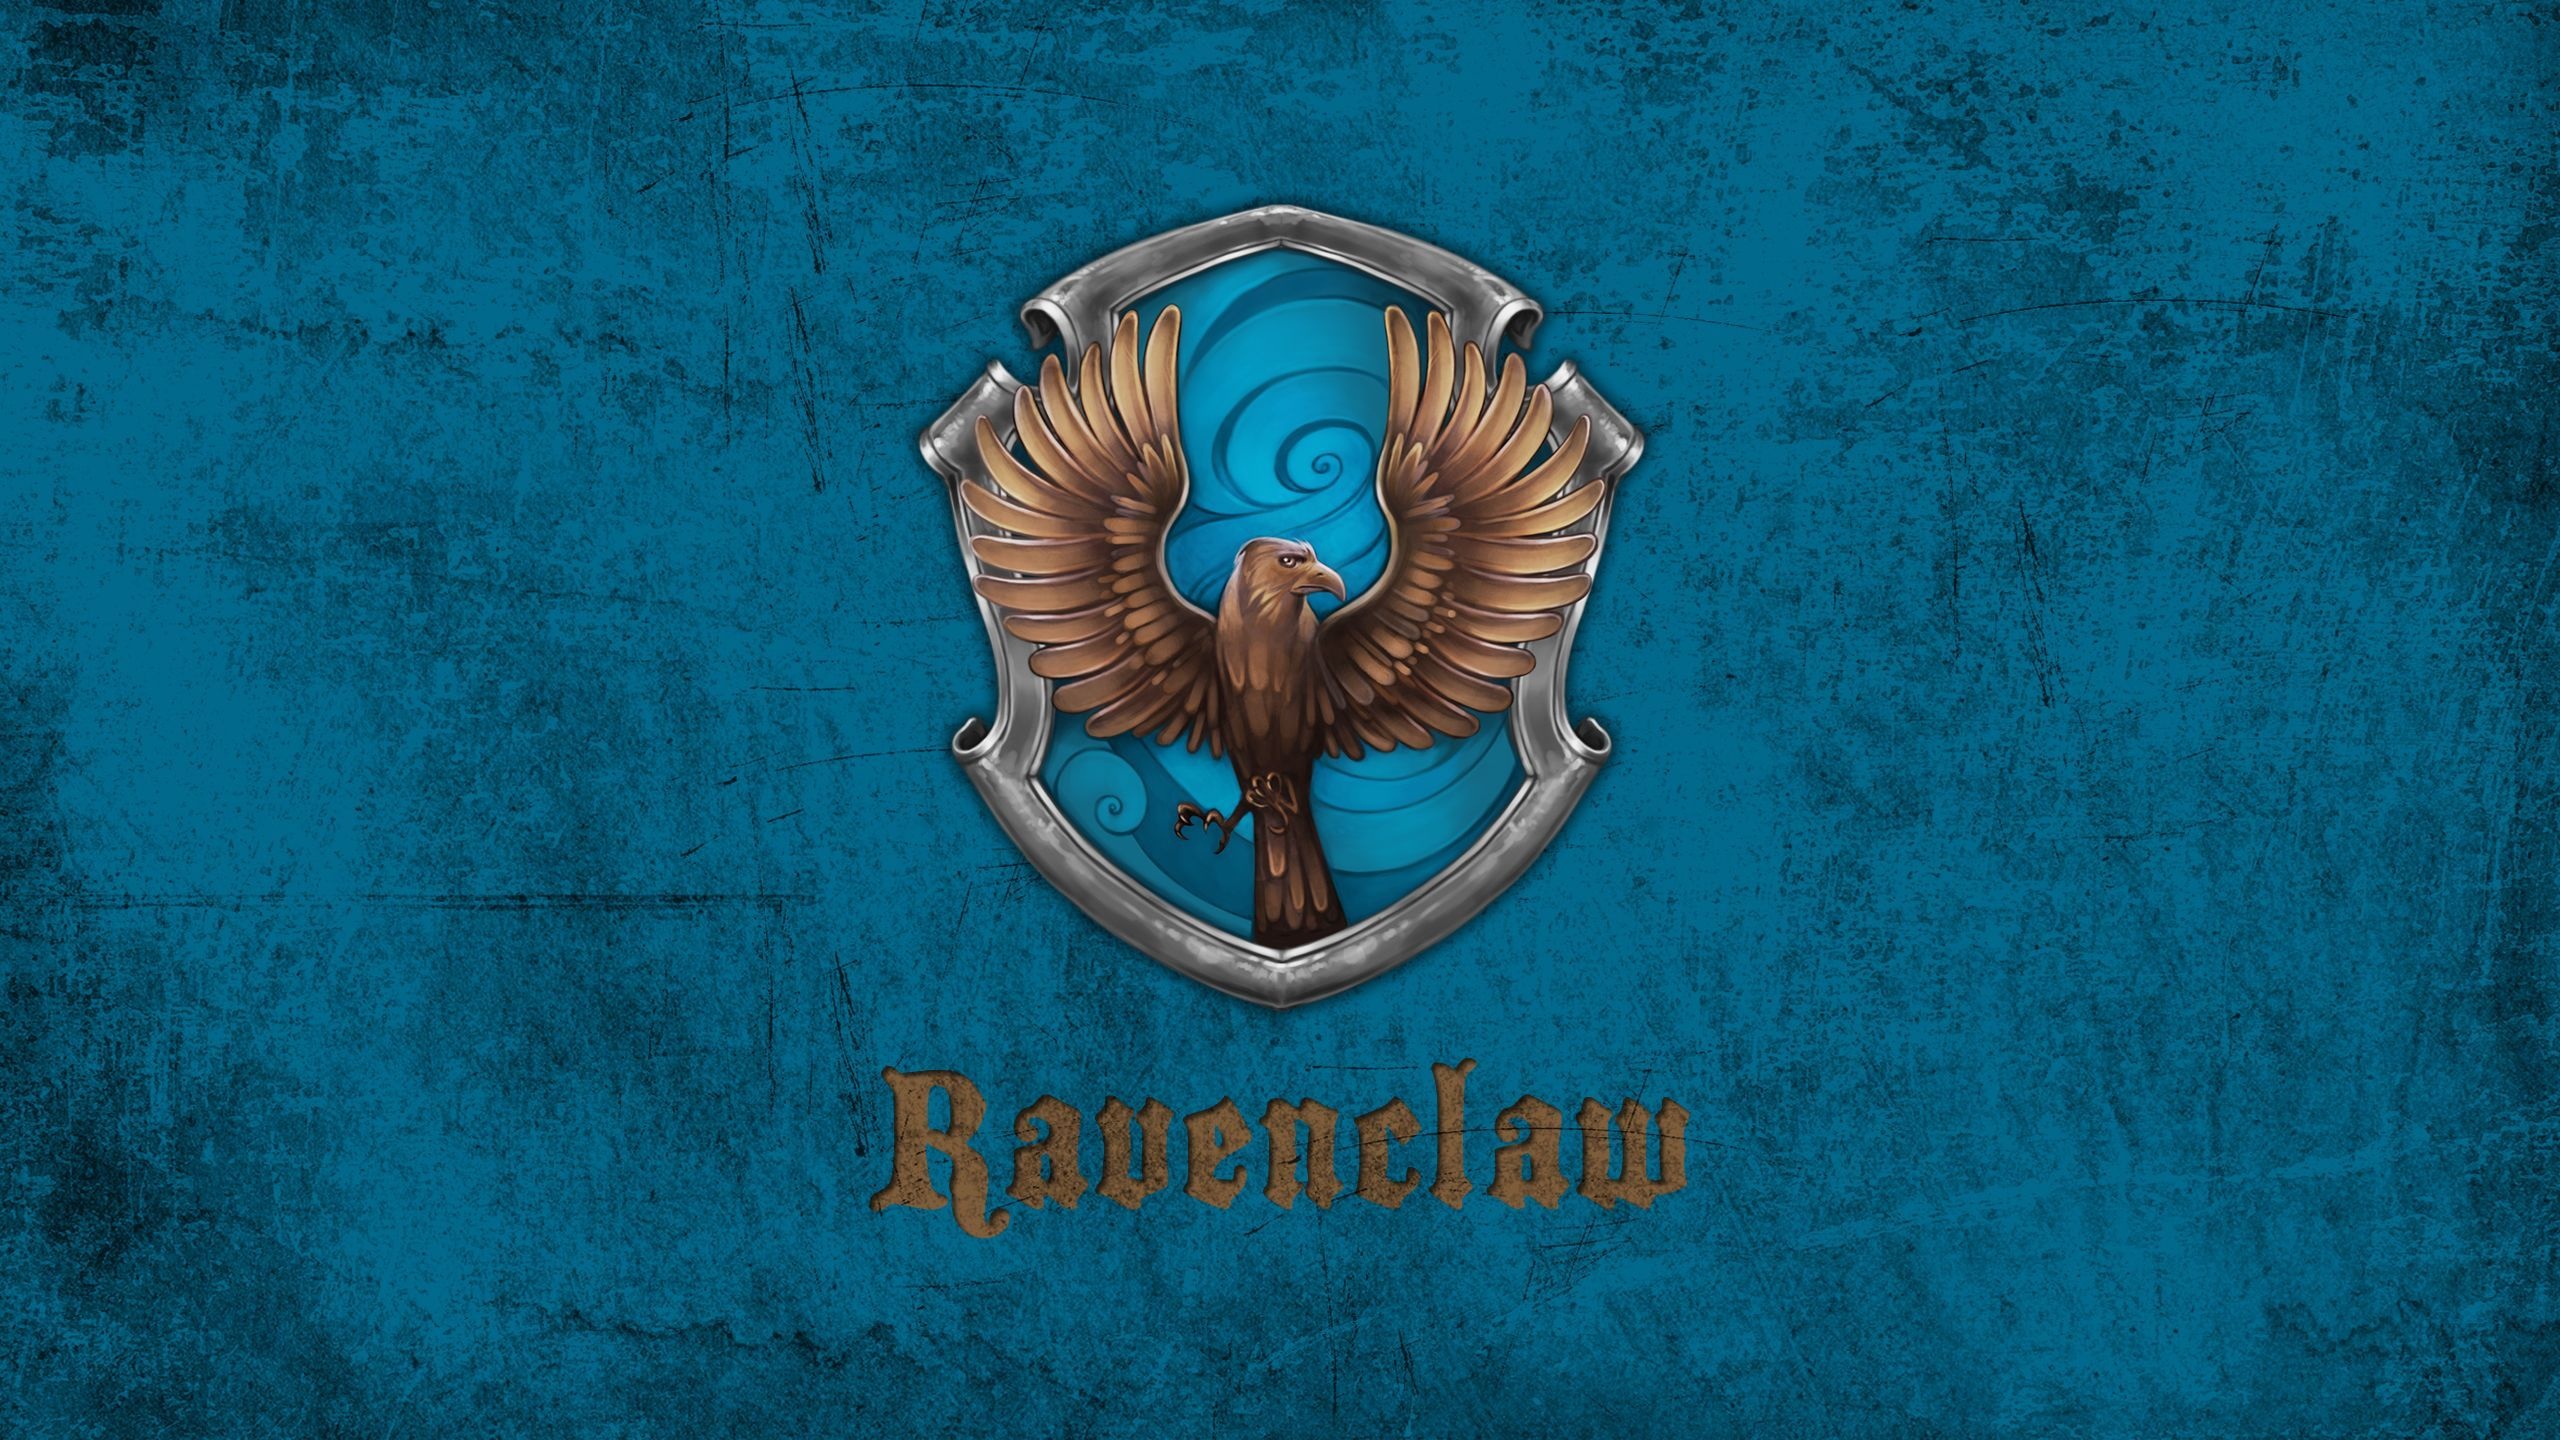 Ravenclaw wallpapers, Top free backgrounds, House pride, Cleverness, 2560x1440 HD Desktop